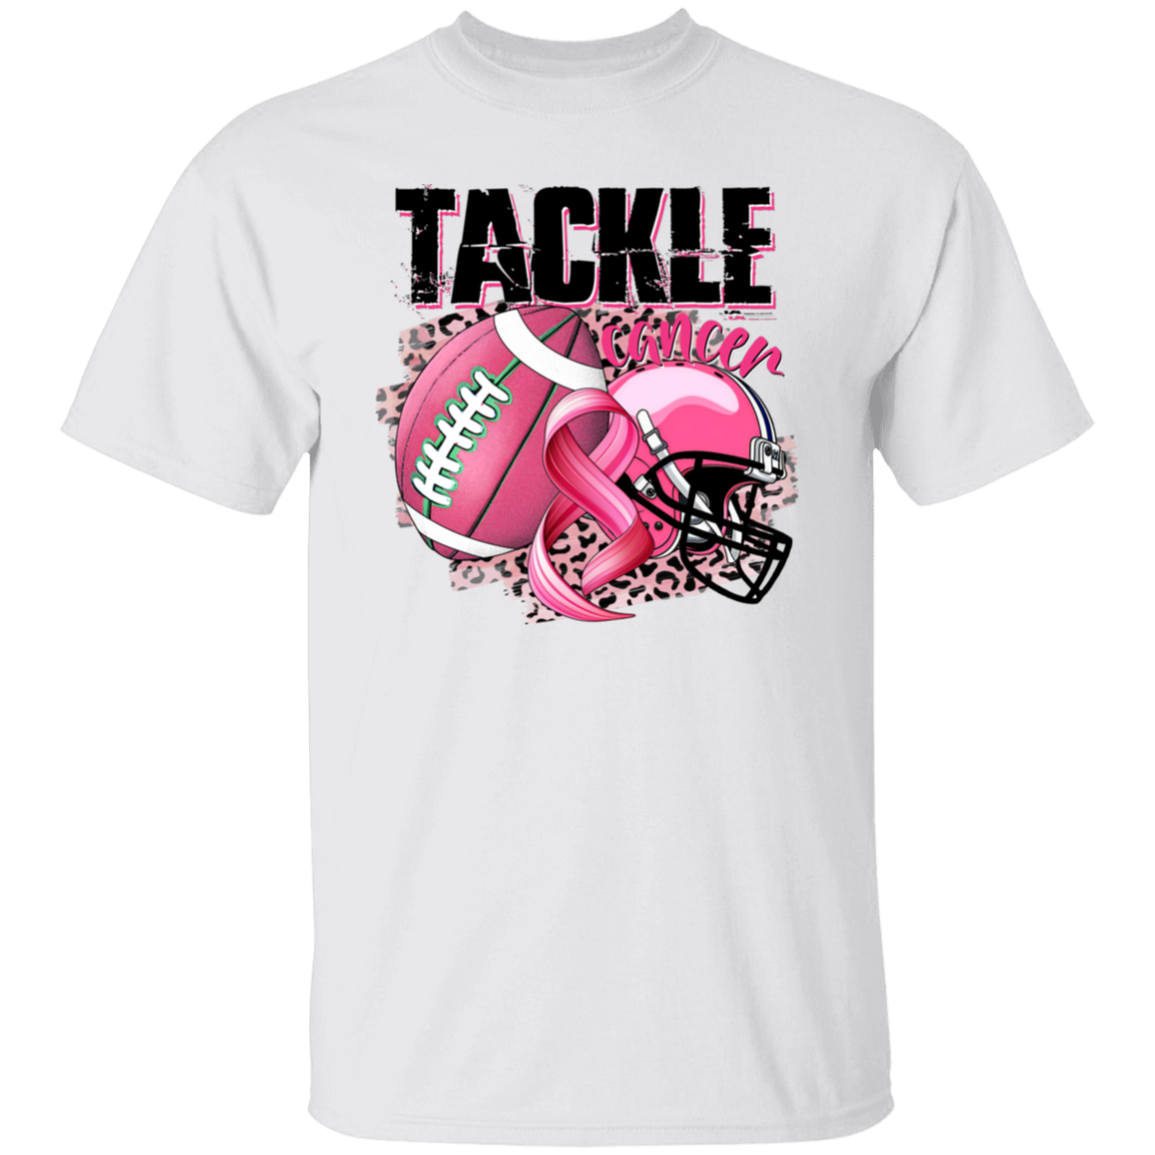 Tackle Cancer Breast Cancer Awareness  T-Shirt